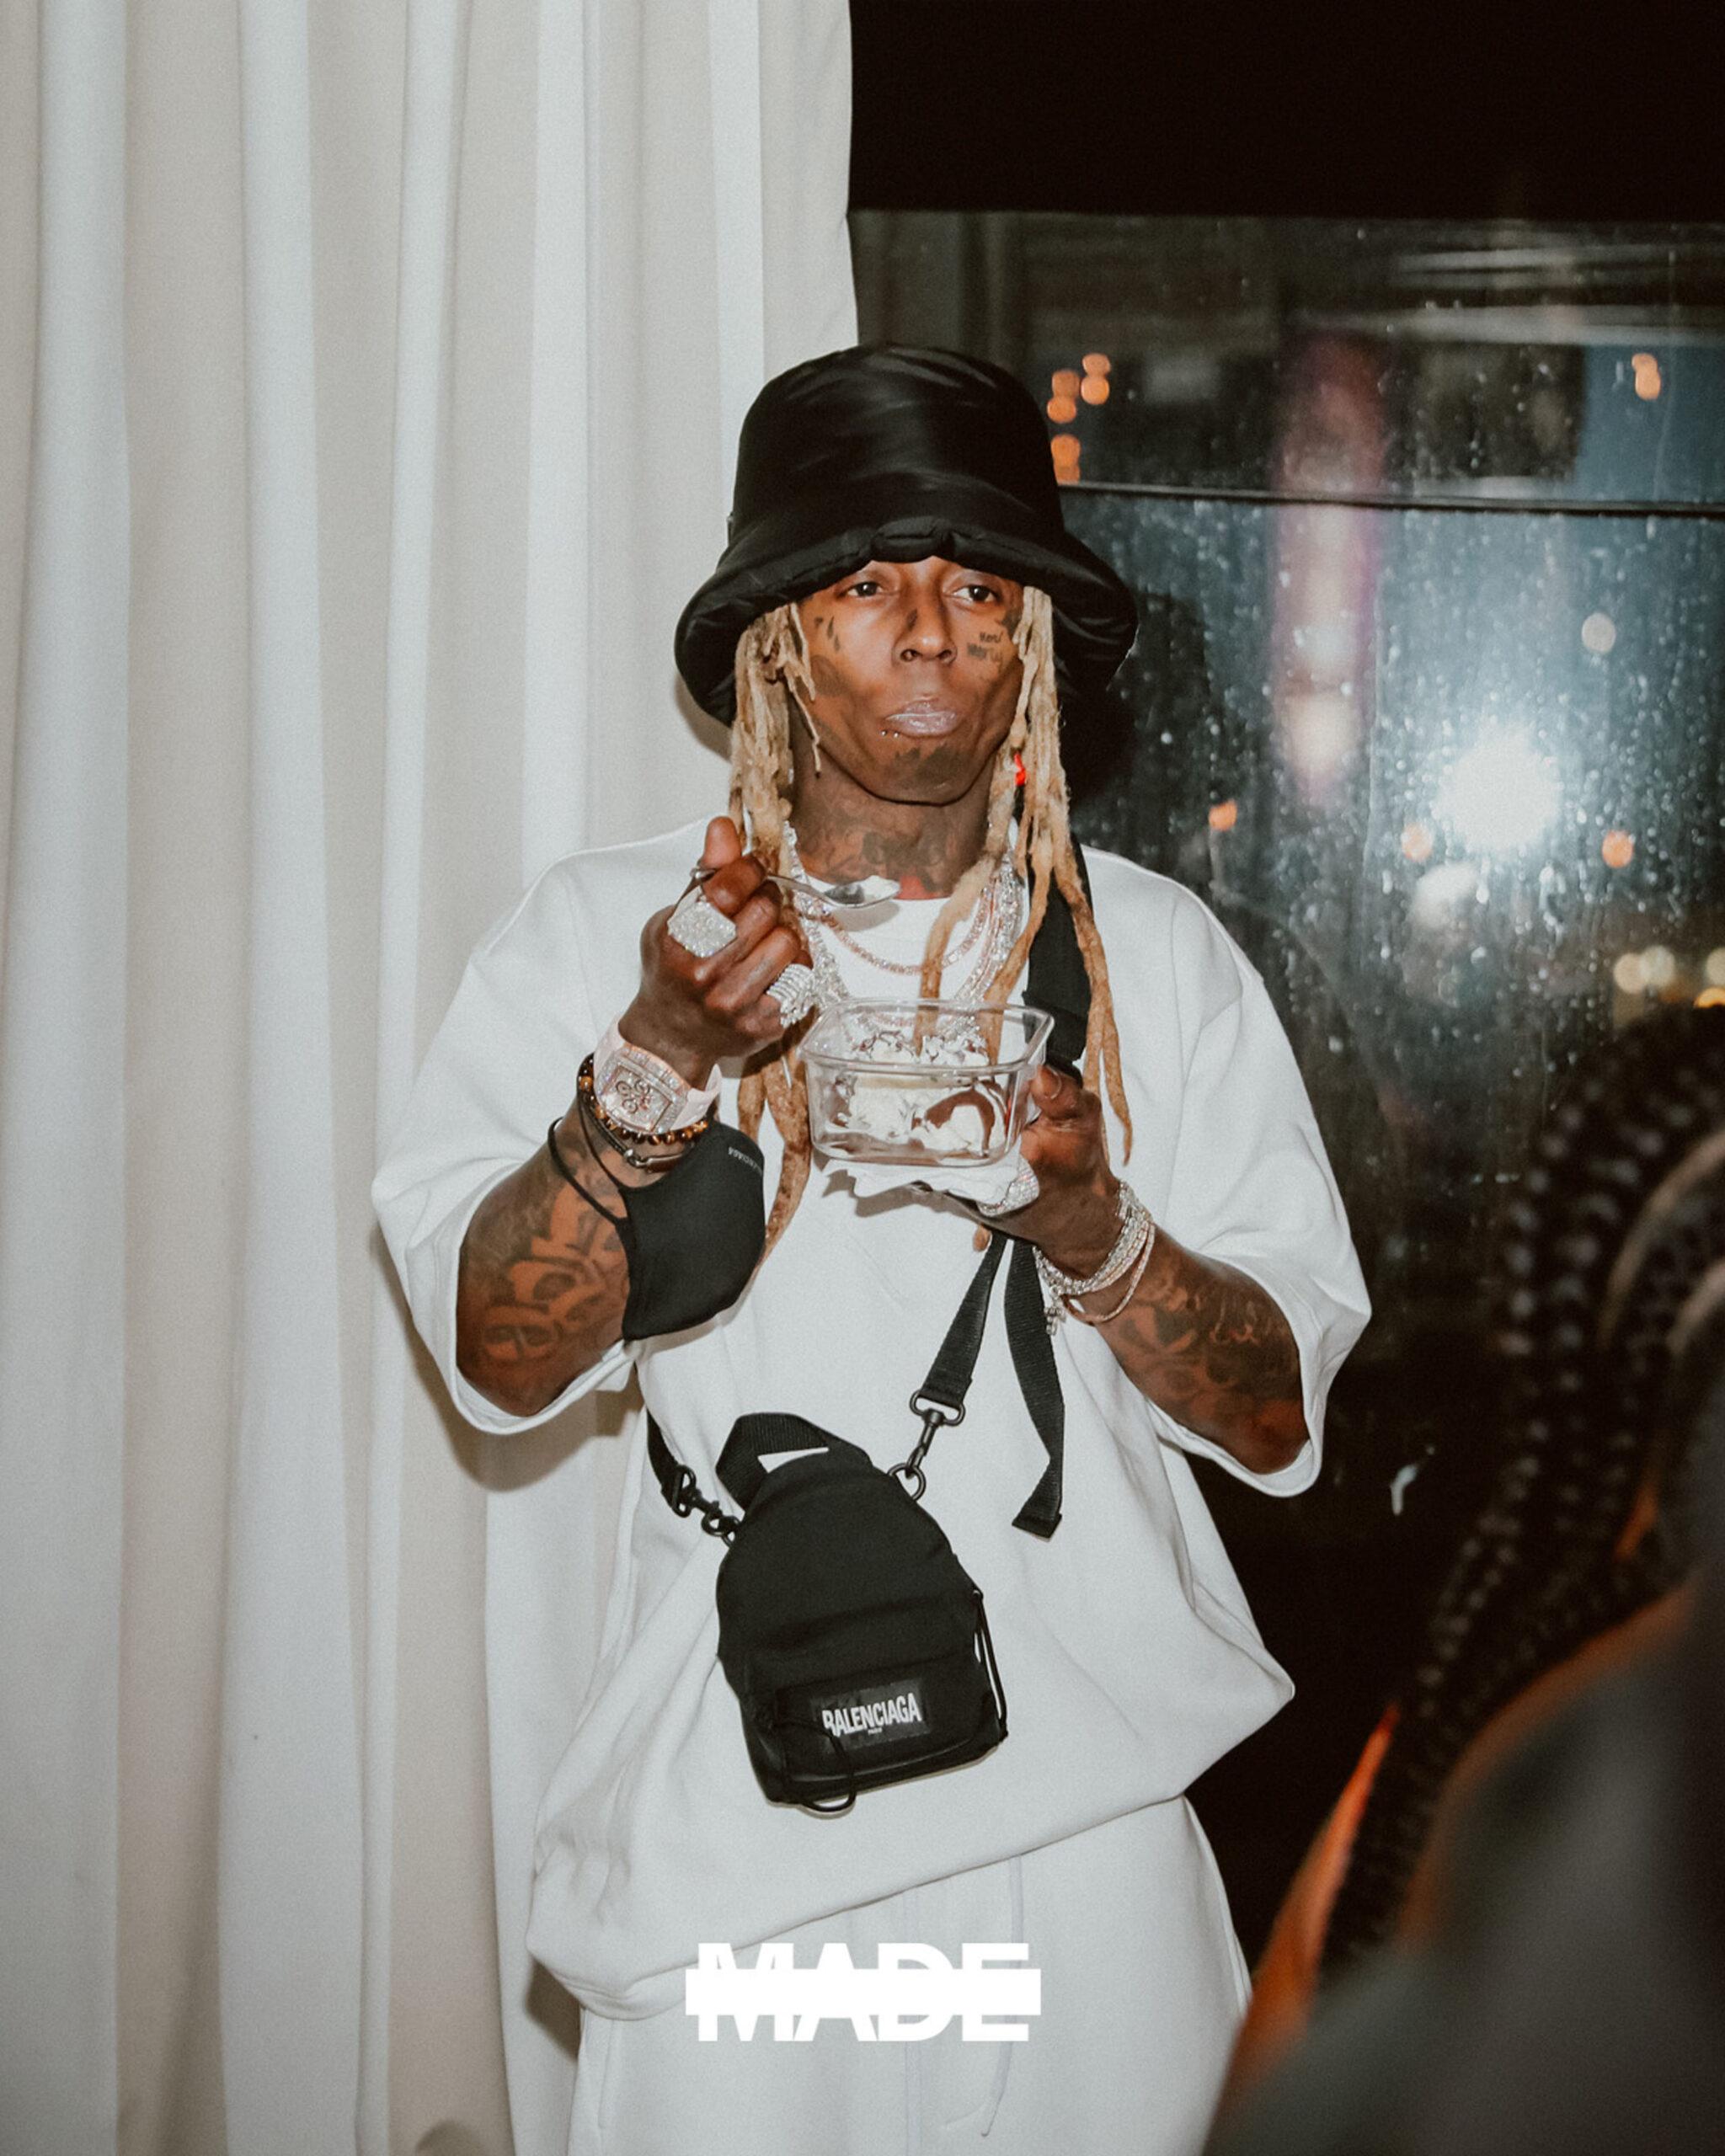 Winnie Harlow and Lil Wayne party together as they join 2 Chainz and Trey Songz at Saadiq by Made Nightlife